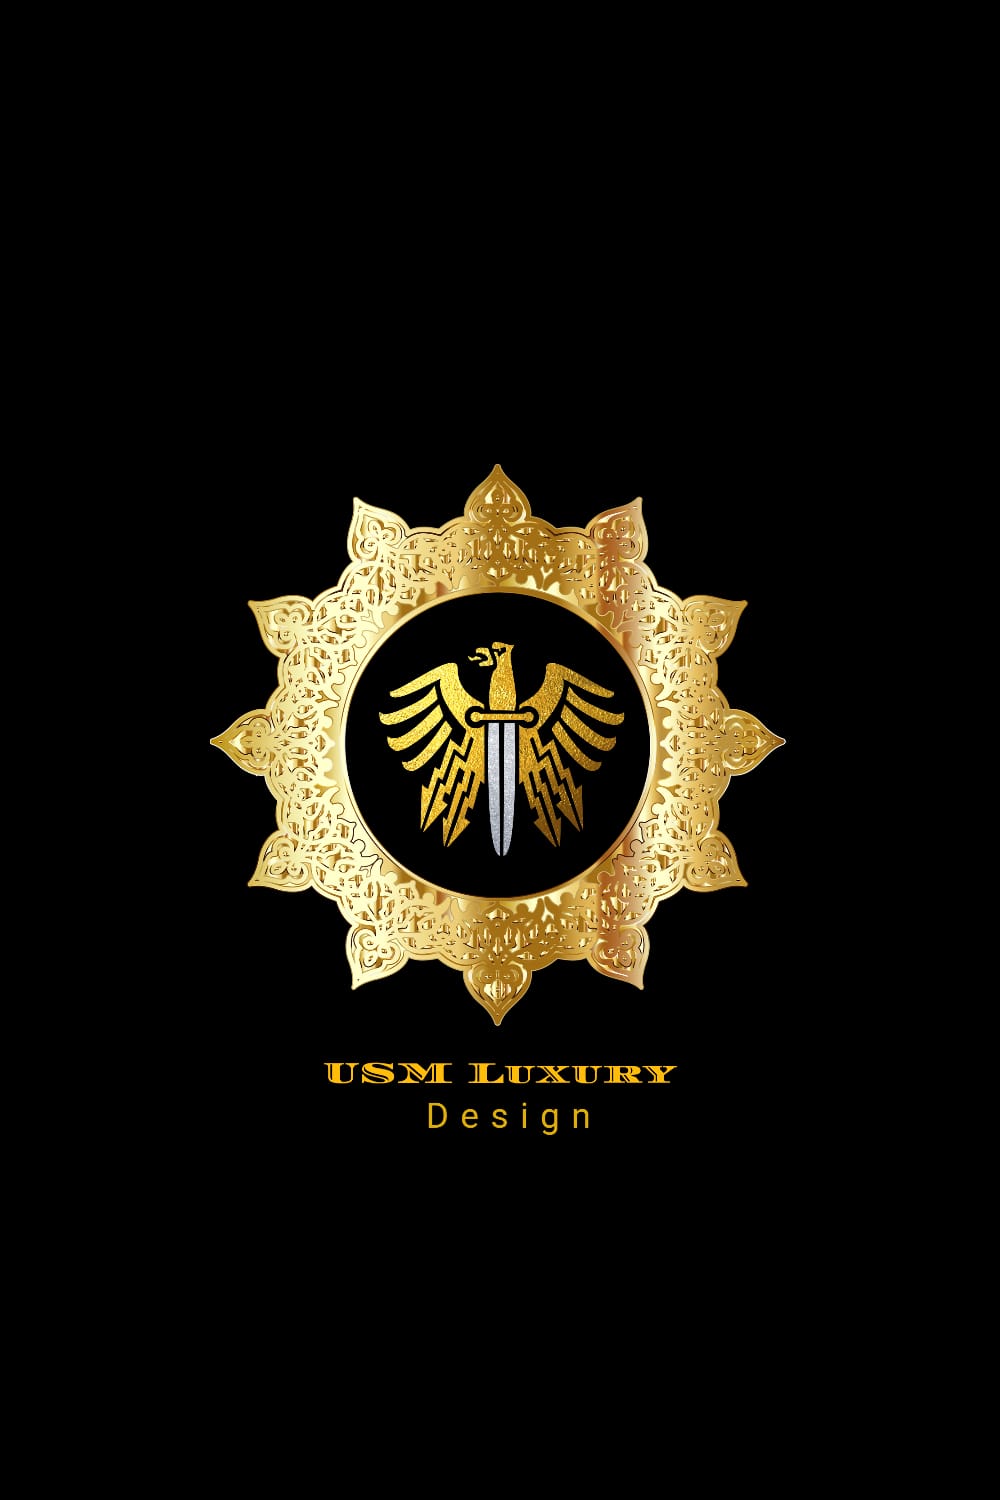 Gold emblem with a sword and wings on a black background.